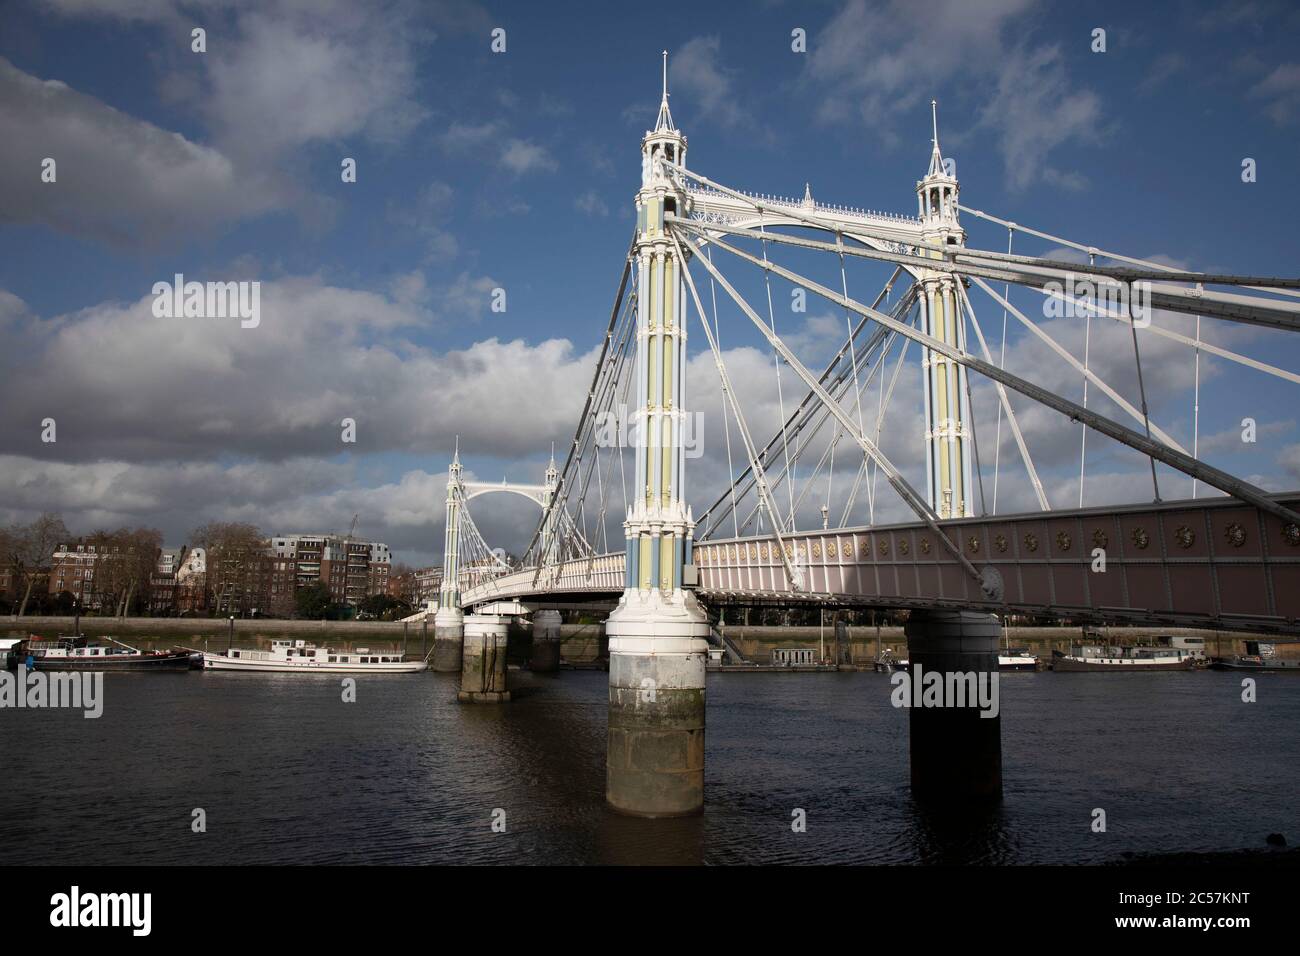 View across the River Thames path on the South side at Battersea looking towards Chelsea over Albert Bridge on 1st February 2020 in London, England, United Kingdom. Albert Bridge is a road bridge over the Tideway of the River Thames connecting Chelsea in Central London on the north, left bank to Battersea on the south. Designed and built by Rowland Mason Ordish in 1873. Stock Photo